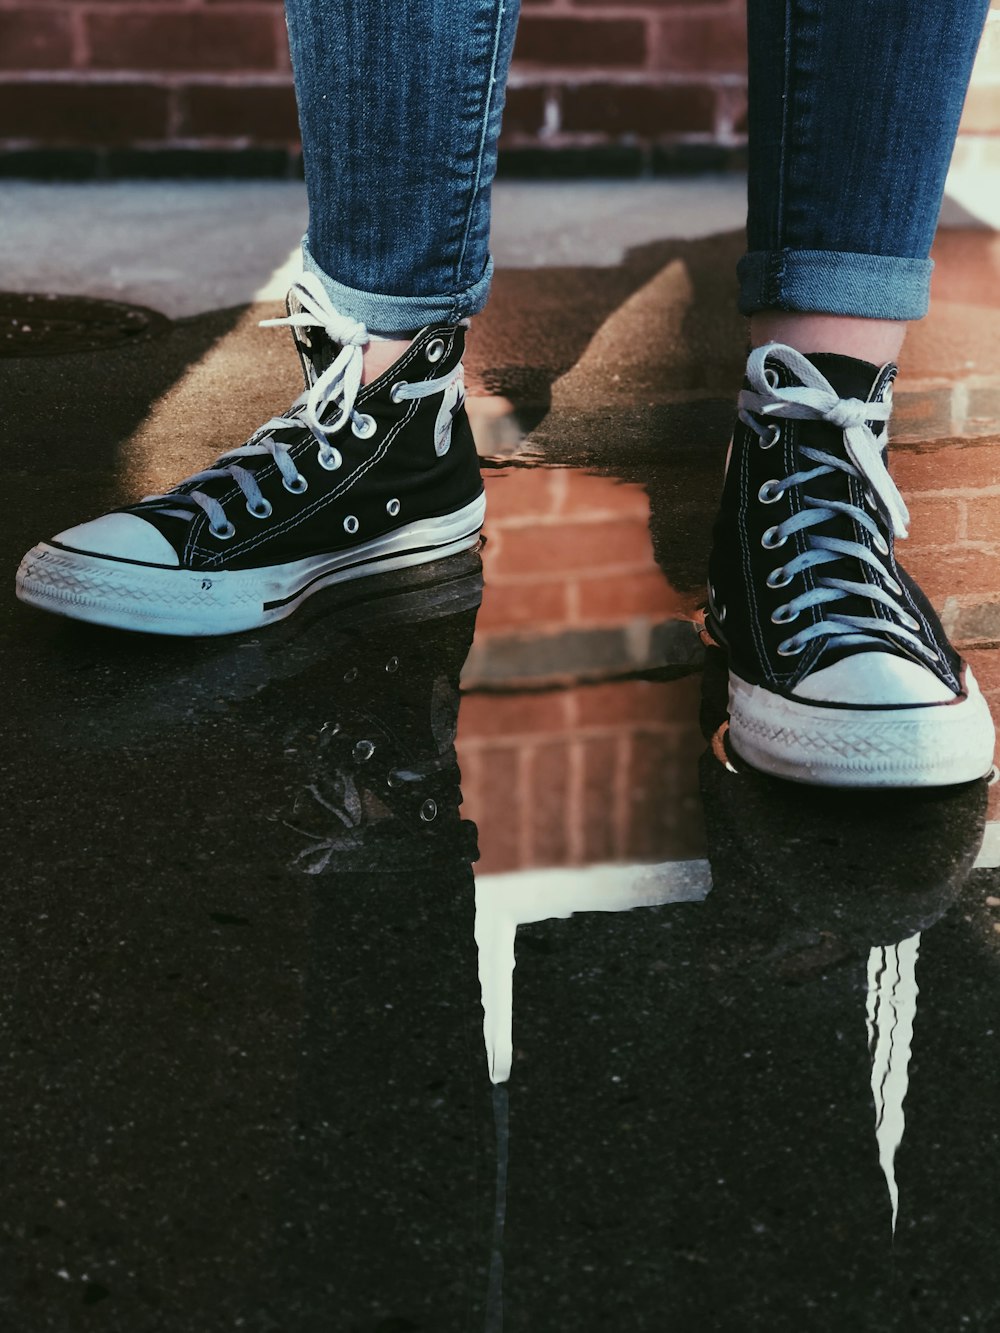 person wearing black high-top sneakers photo – Free Jeans Image on Unsplash